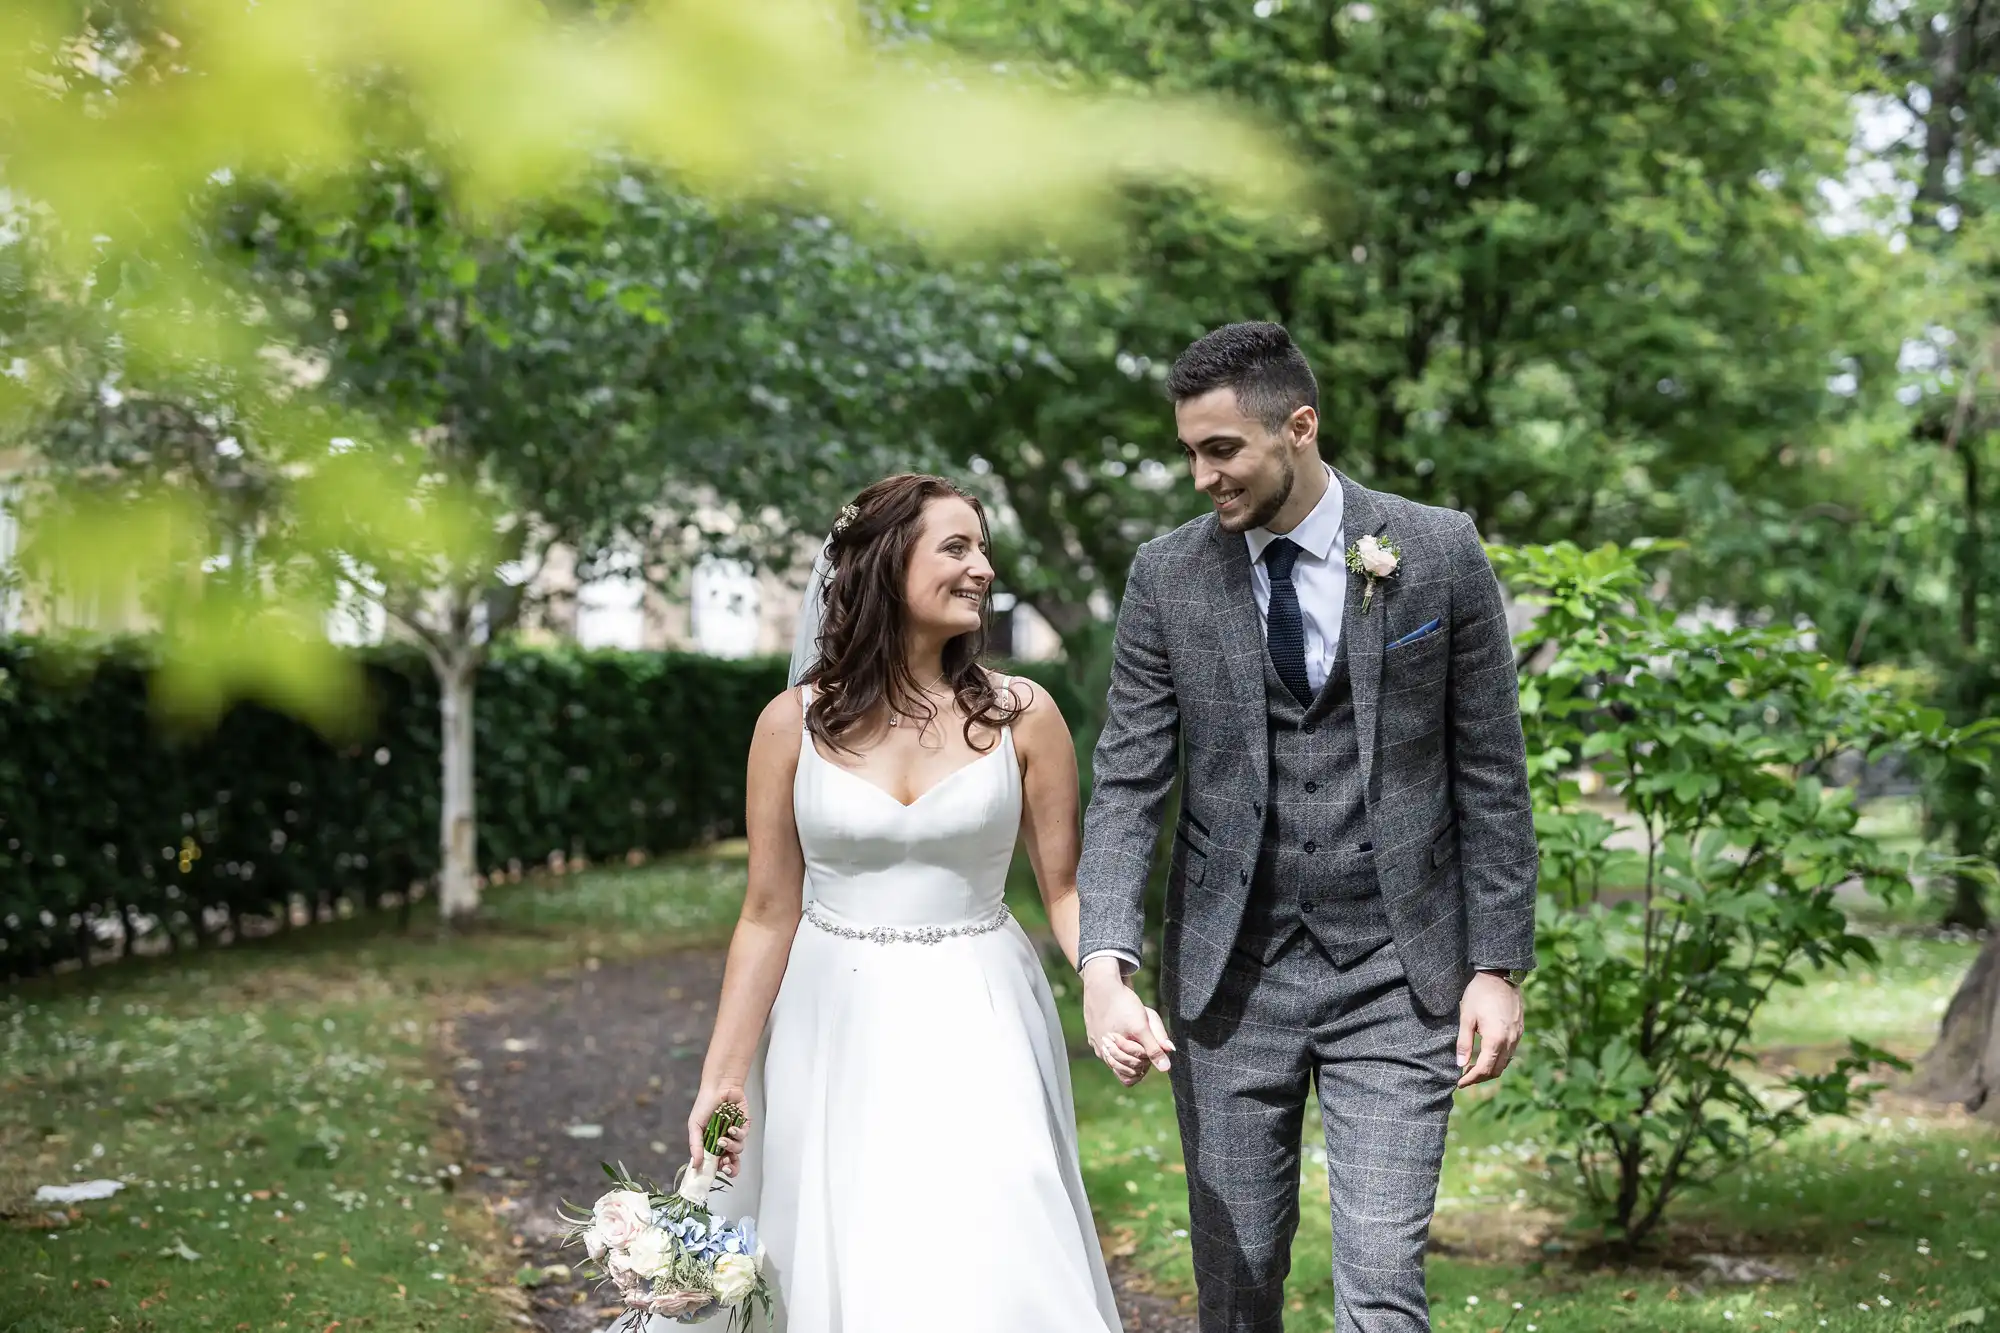 Bride and groom holding hands and smiling while walking through a lush garden.